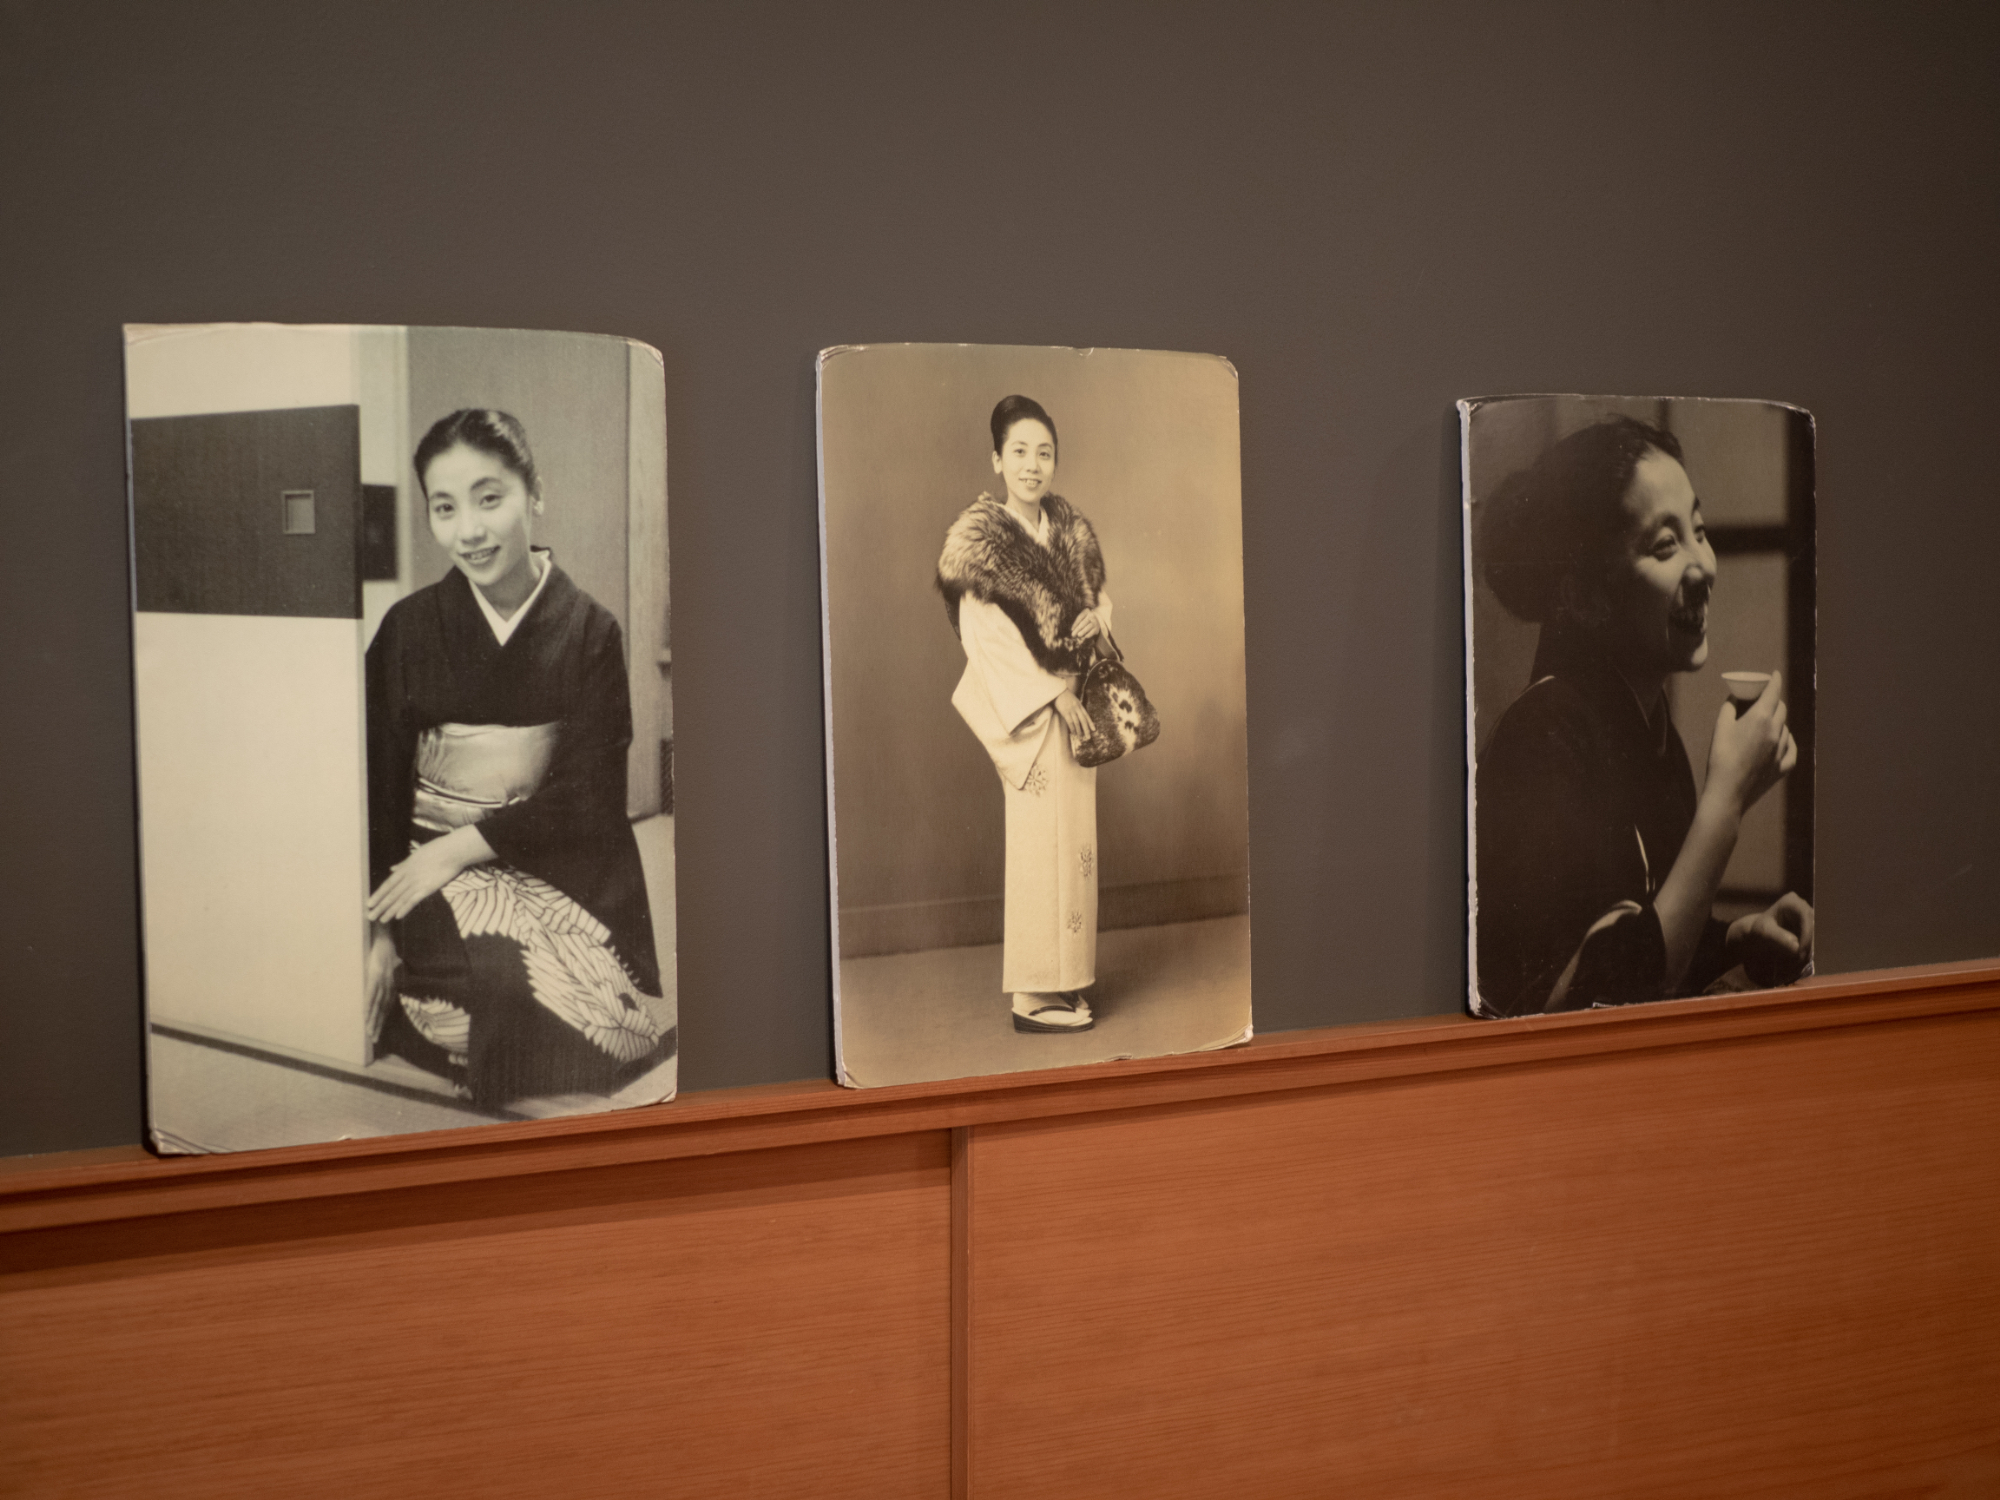 Old photos of Suzu displayed in the entrance of the ryokan